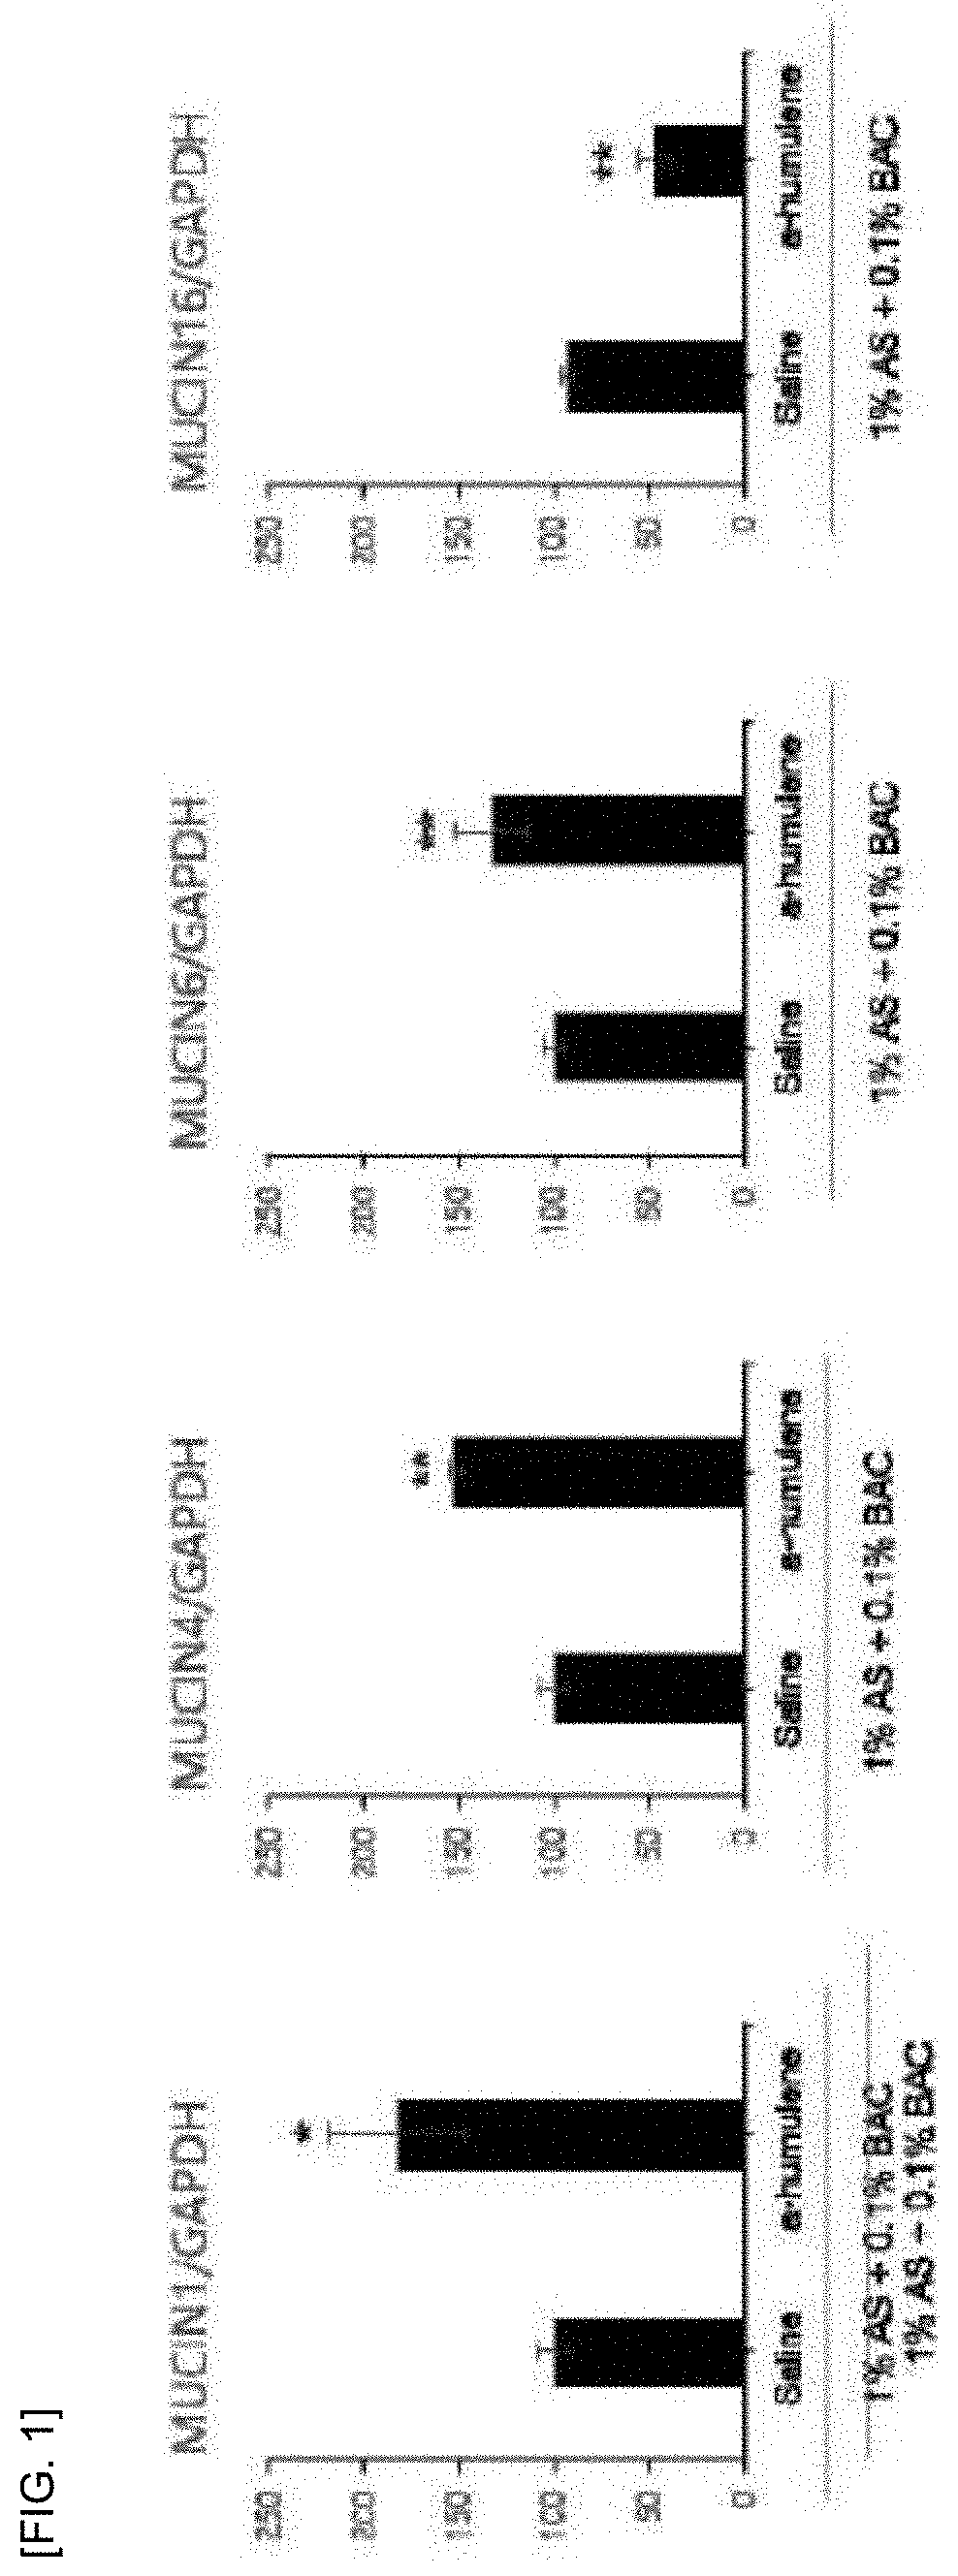 Composition for preveinting or treating dry eye syndrome containing alpha-humulene as active ingredient